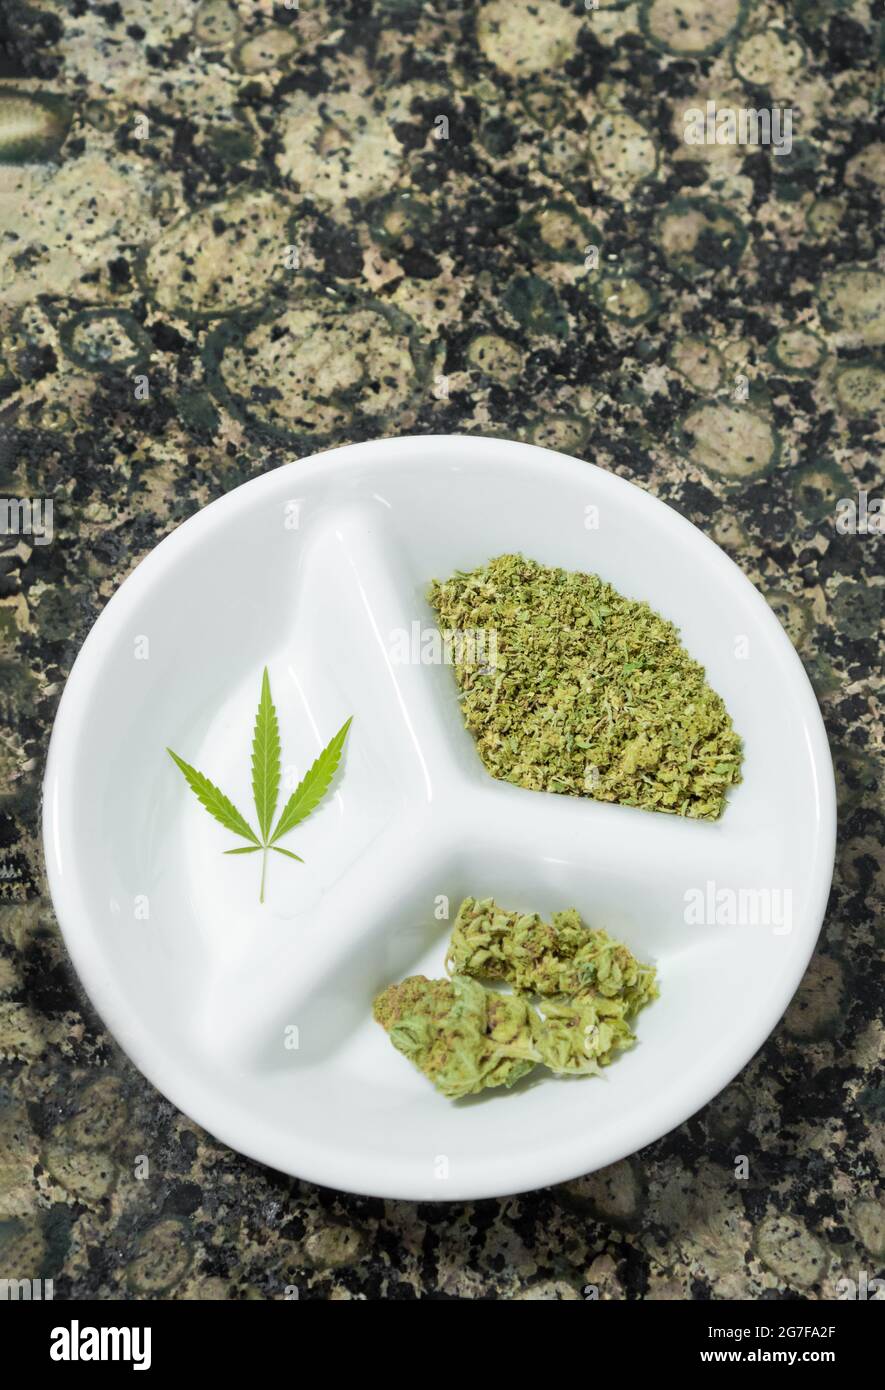 https://c8.alamy.com/comp/2G7FA2F/top-view-of-tray-with-crushed-cannabis-marijuana-buds-and-leaf-on-a-marble-table-copy-space-top-2G7FA2F.jpg